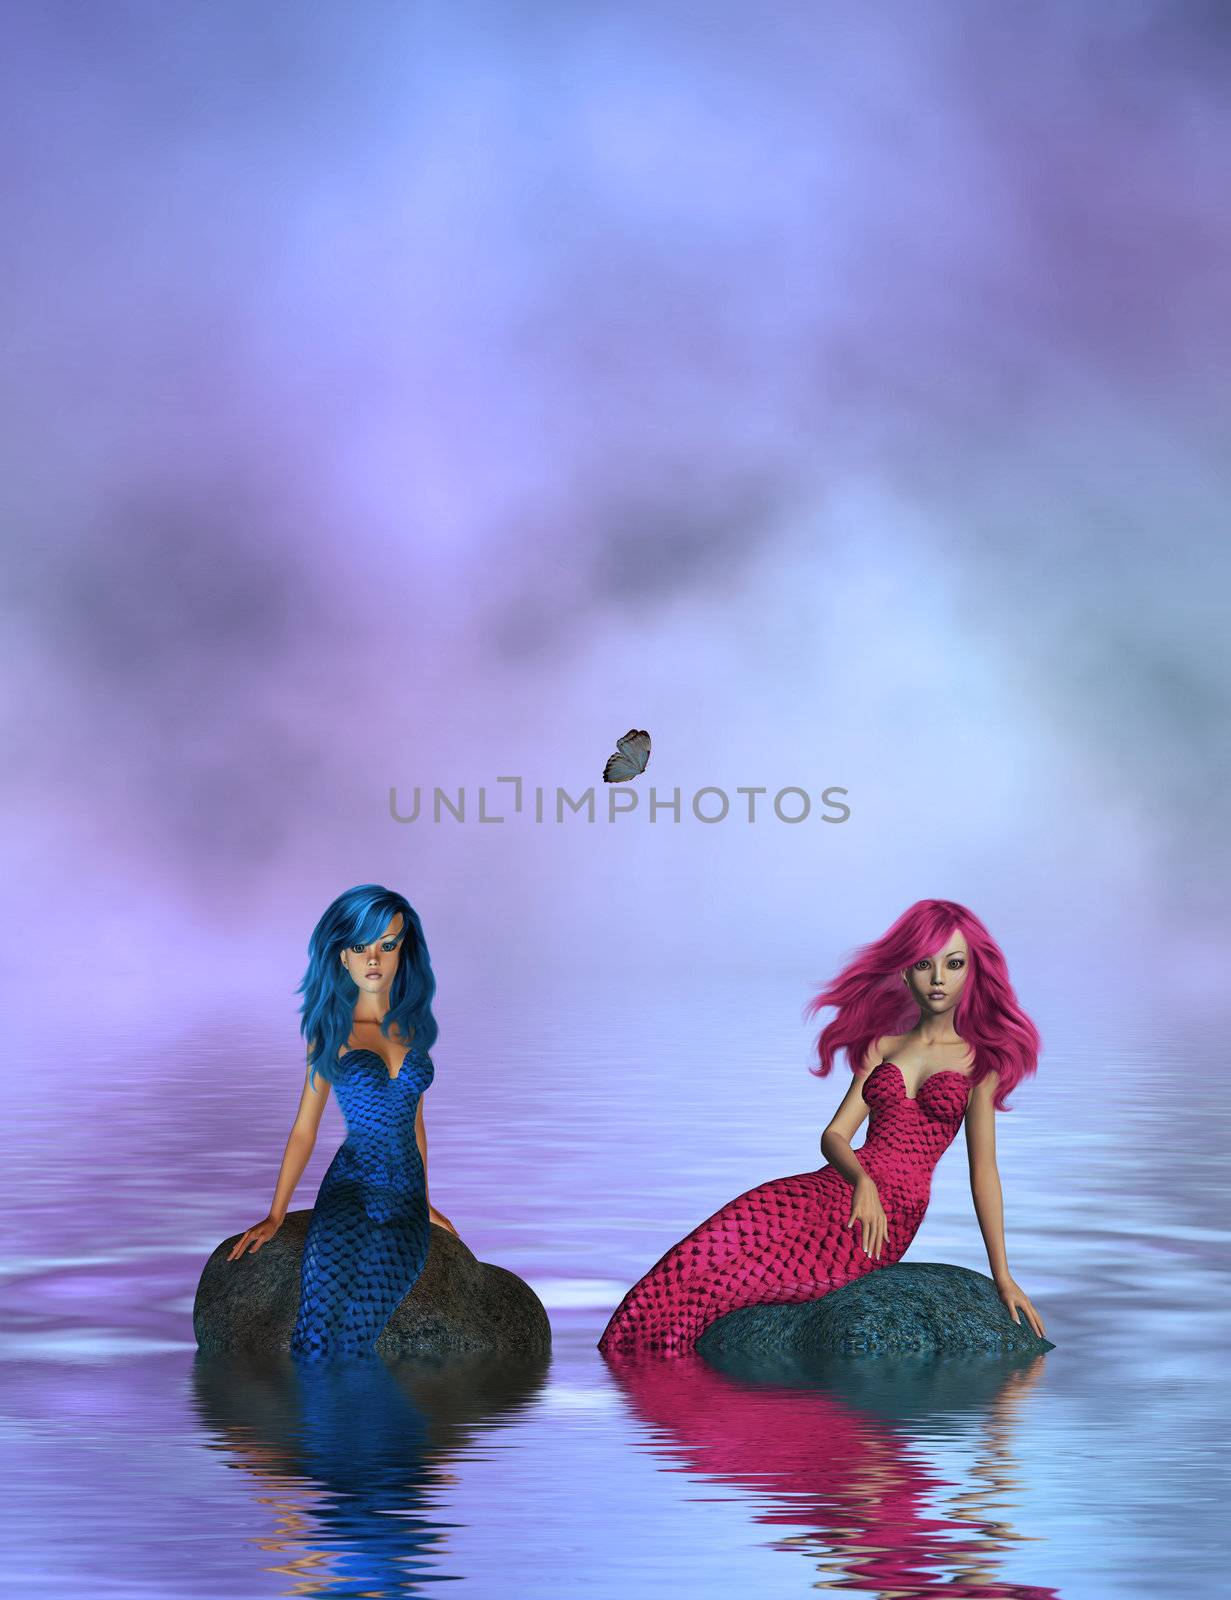 One blue mermaid and one pink mermaid sitting on rocks in the middle of the ocean